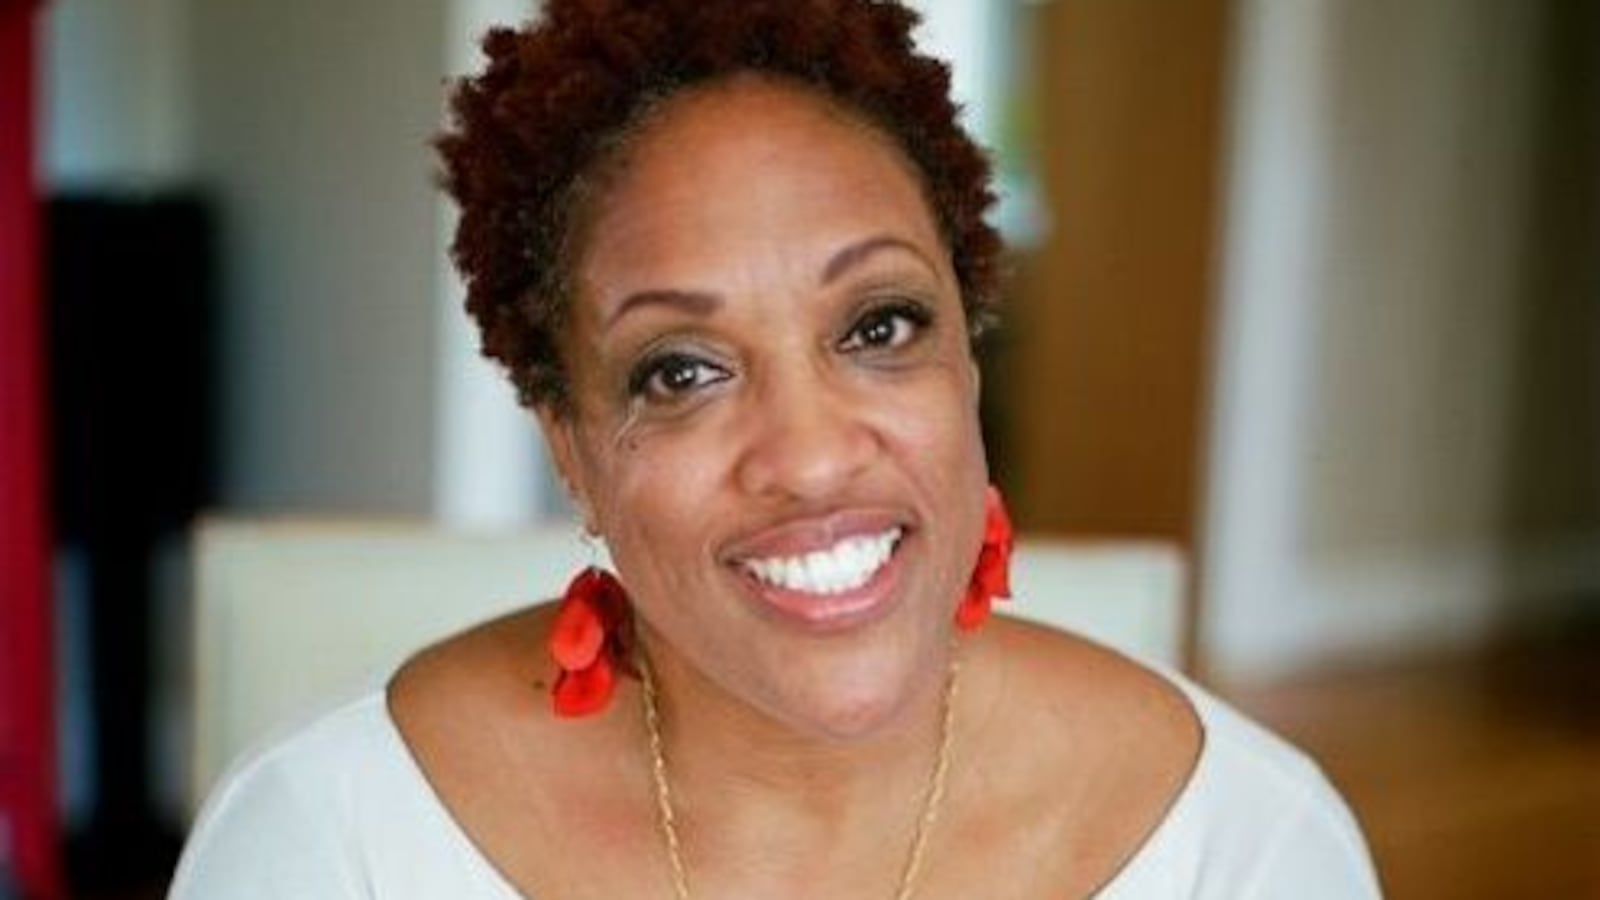 Kendra Ferguson became executive director of KIPP Memphis Collegiate Schools in February, after spending most of her career with KIPP Bay Area Schools in California.